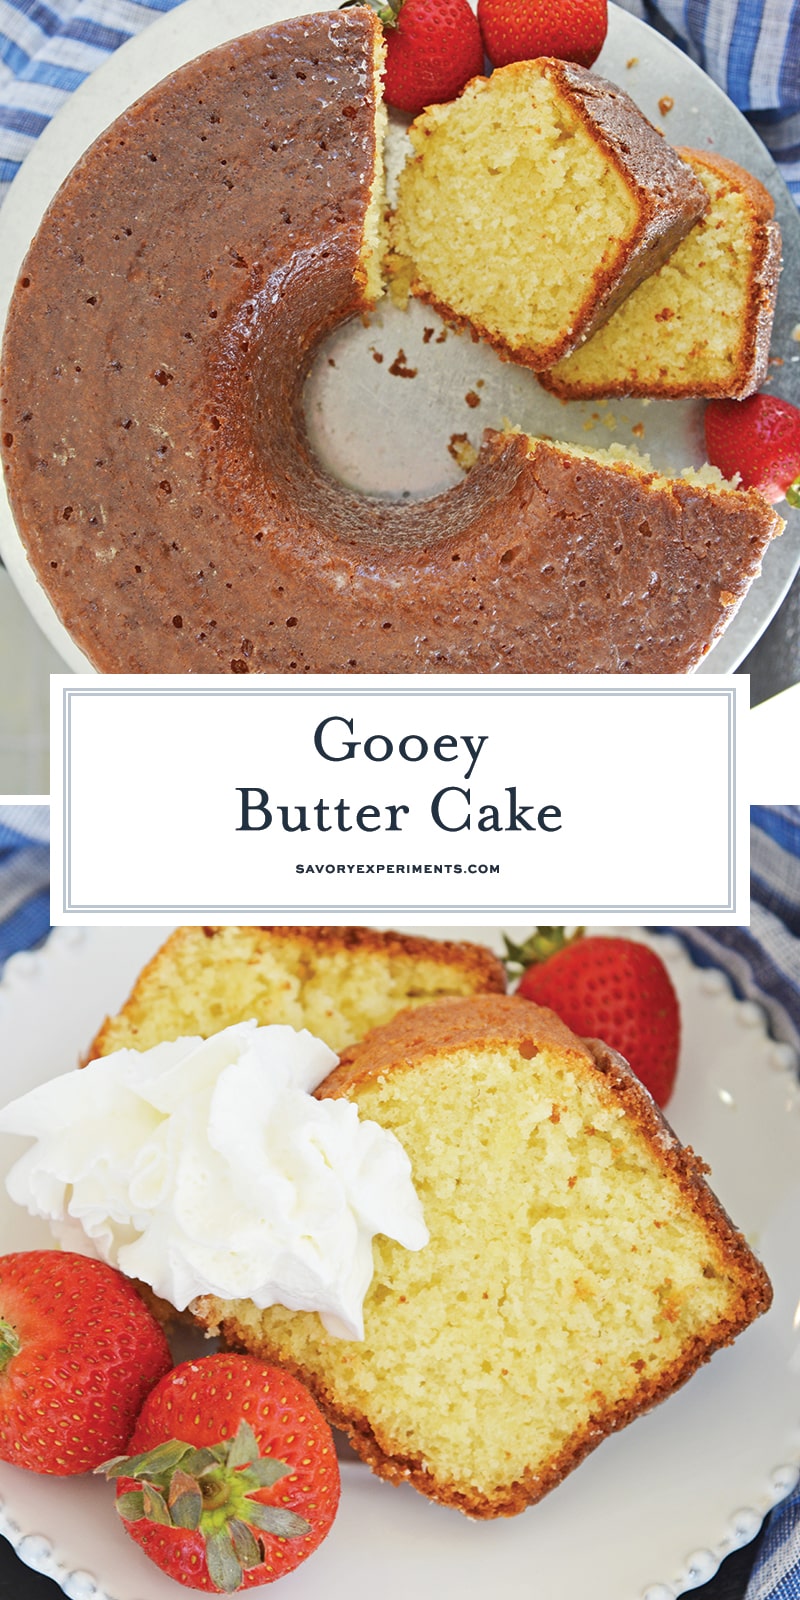 Gooey Butter Cake - Vanilla Cake Basted with Butter Glaze